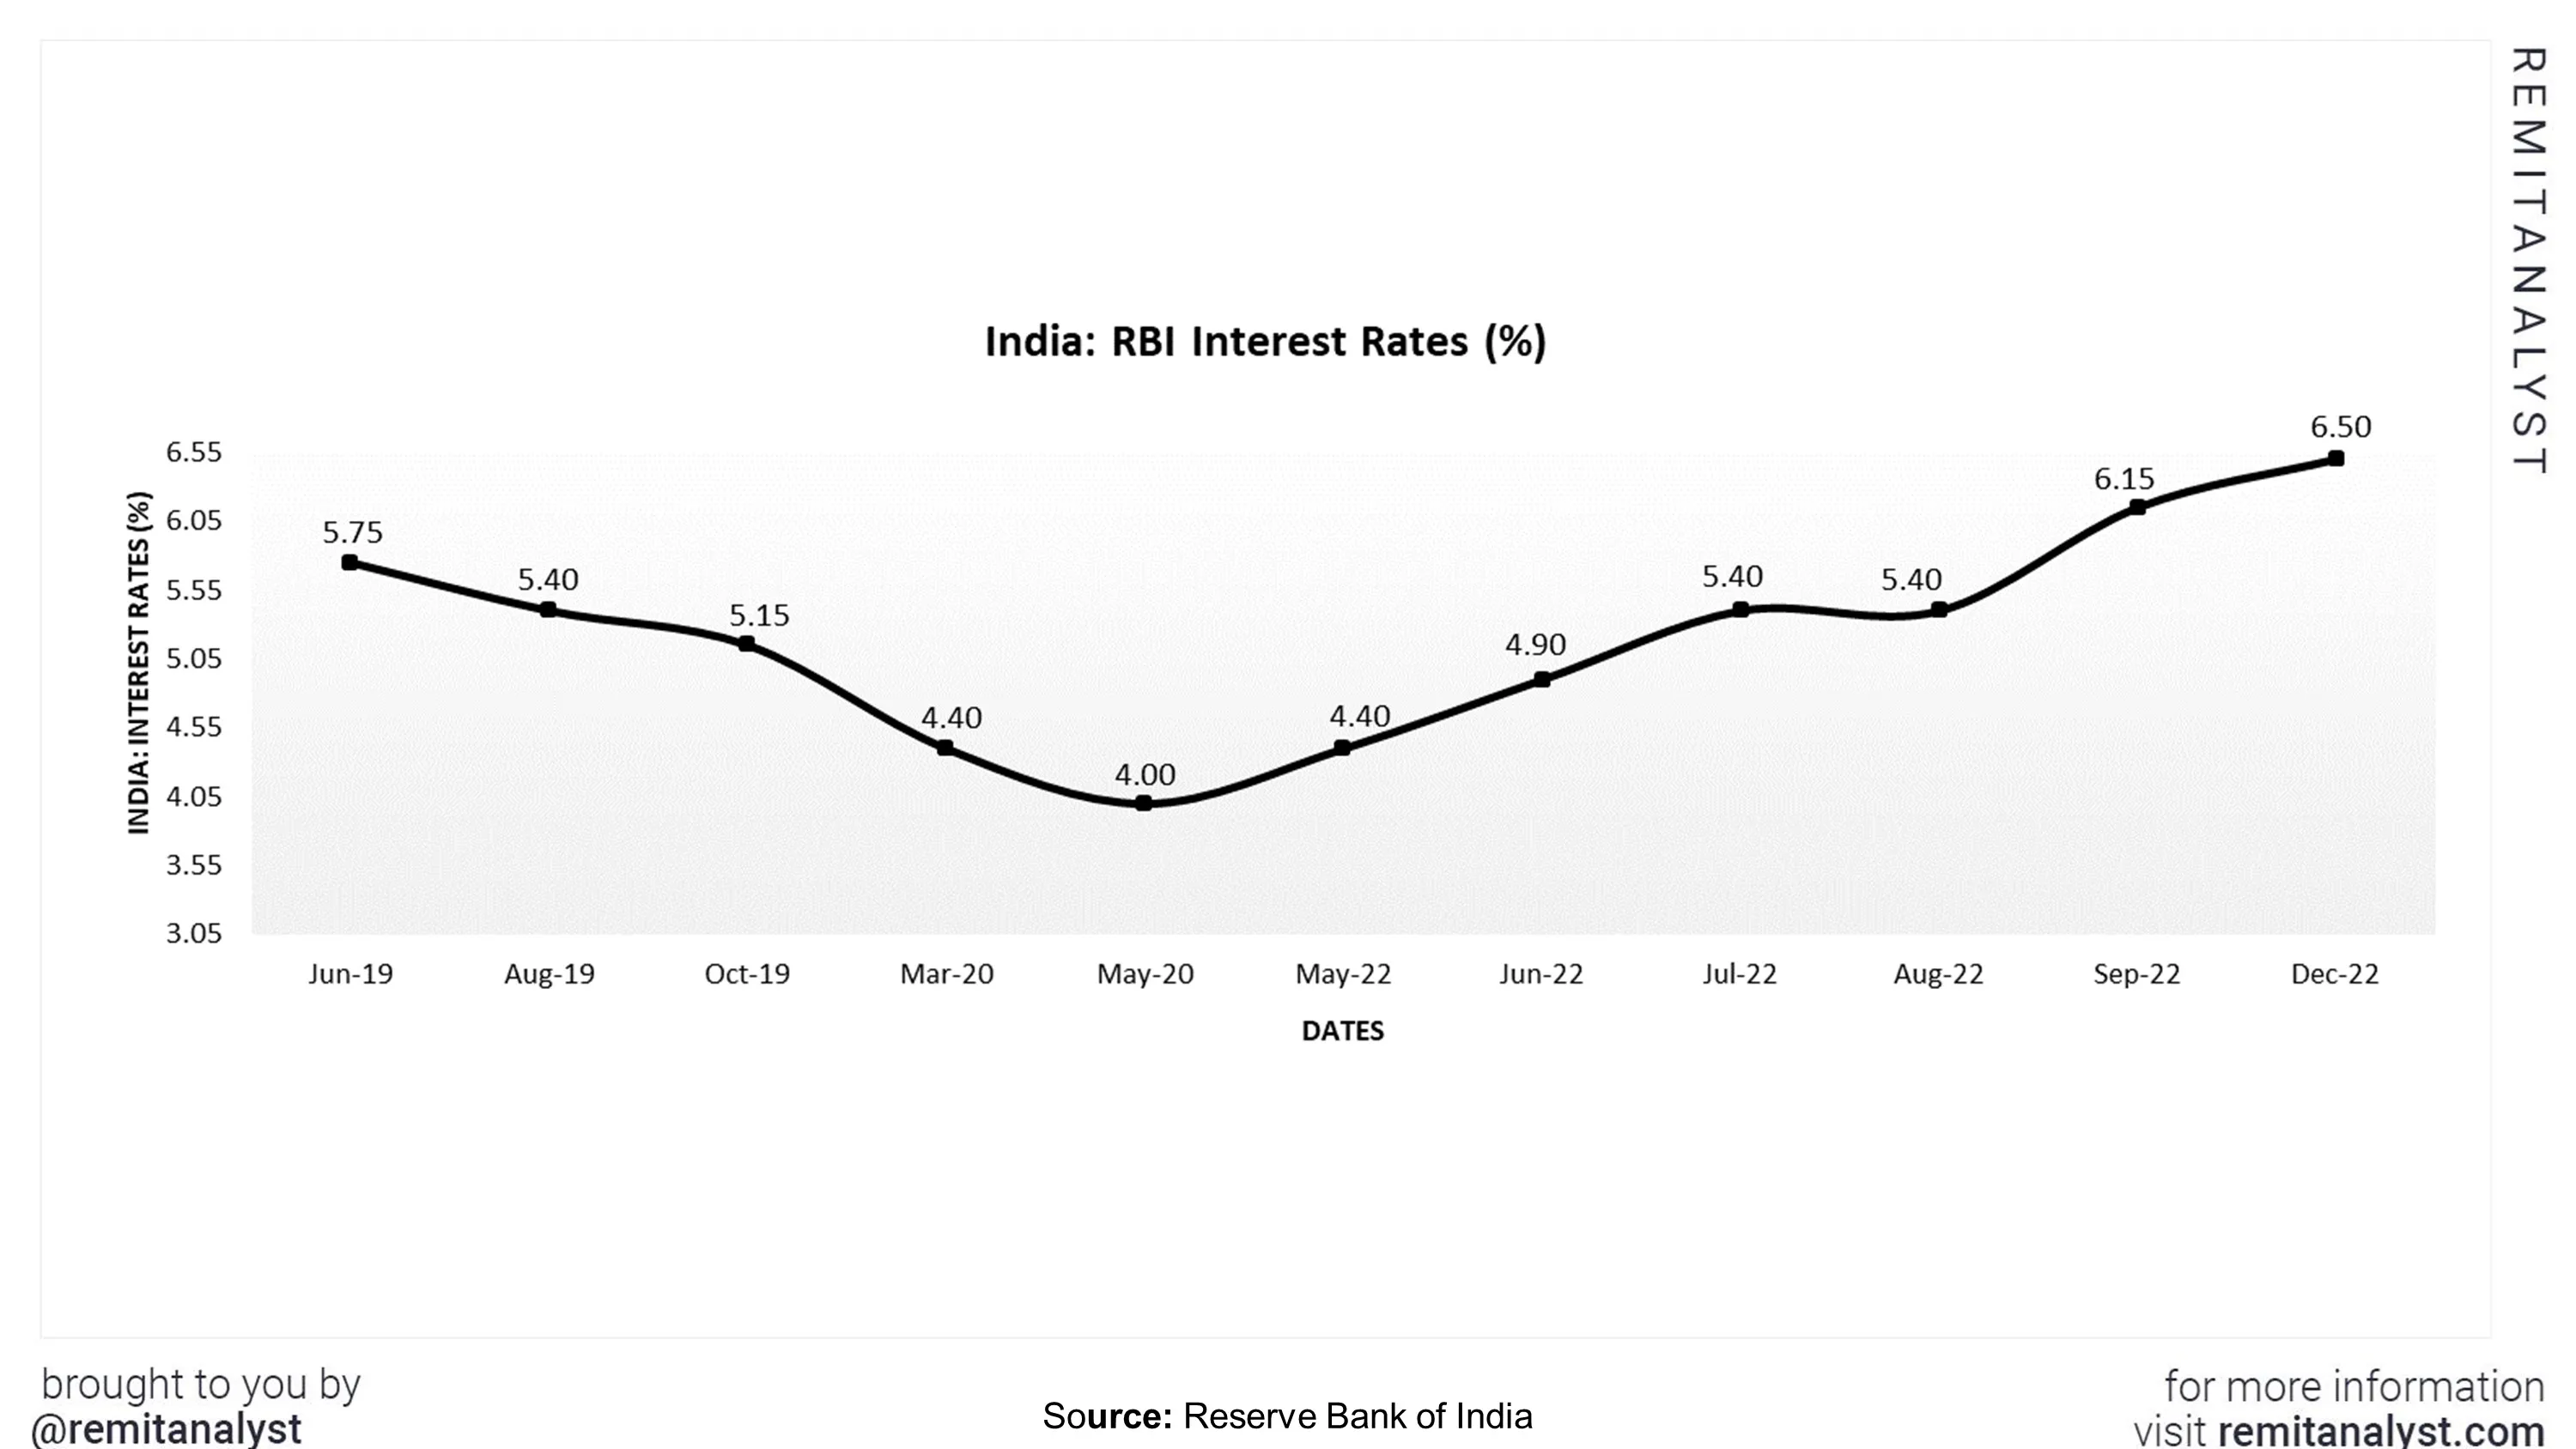 interest-rates-india-from-jun-2019-to-dec-2022